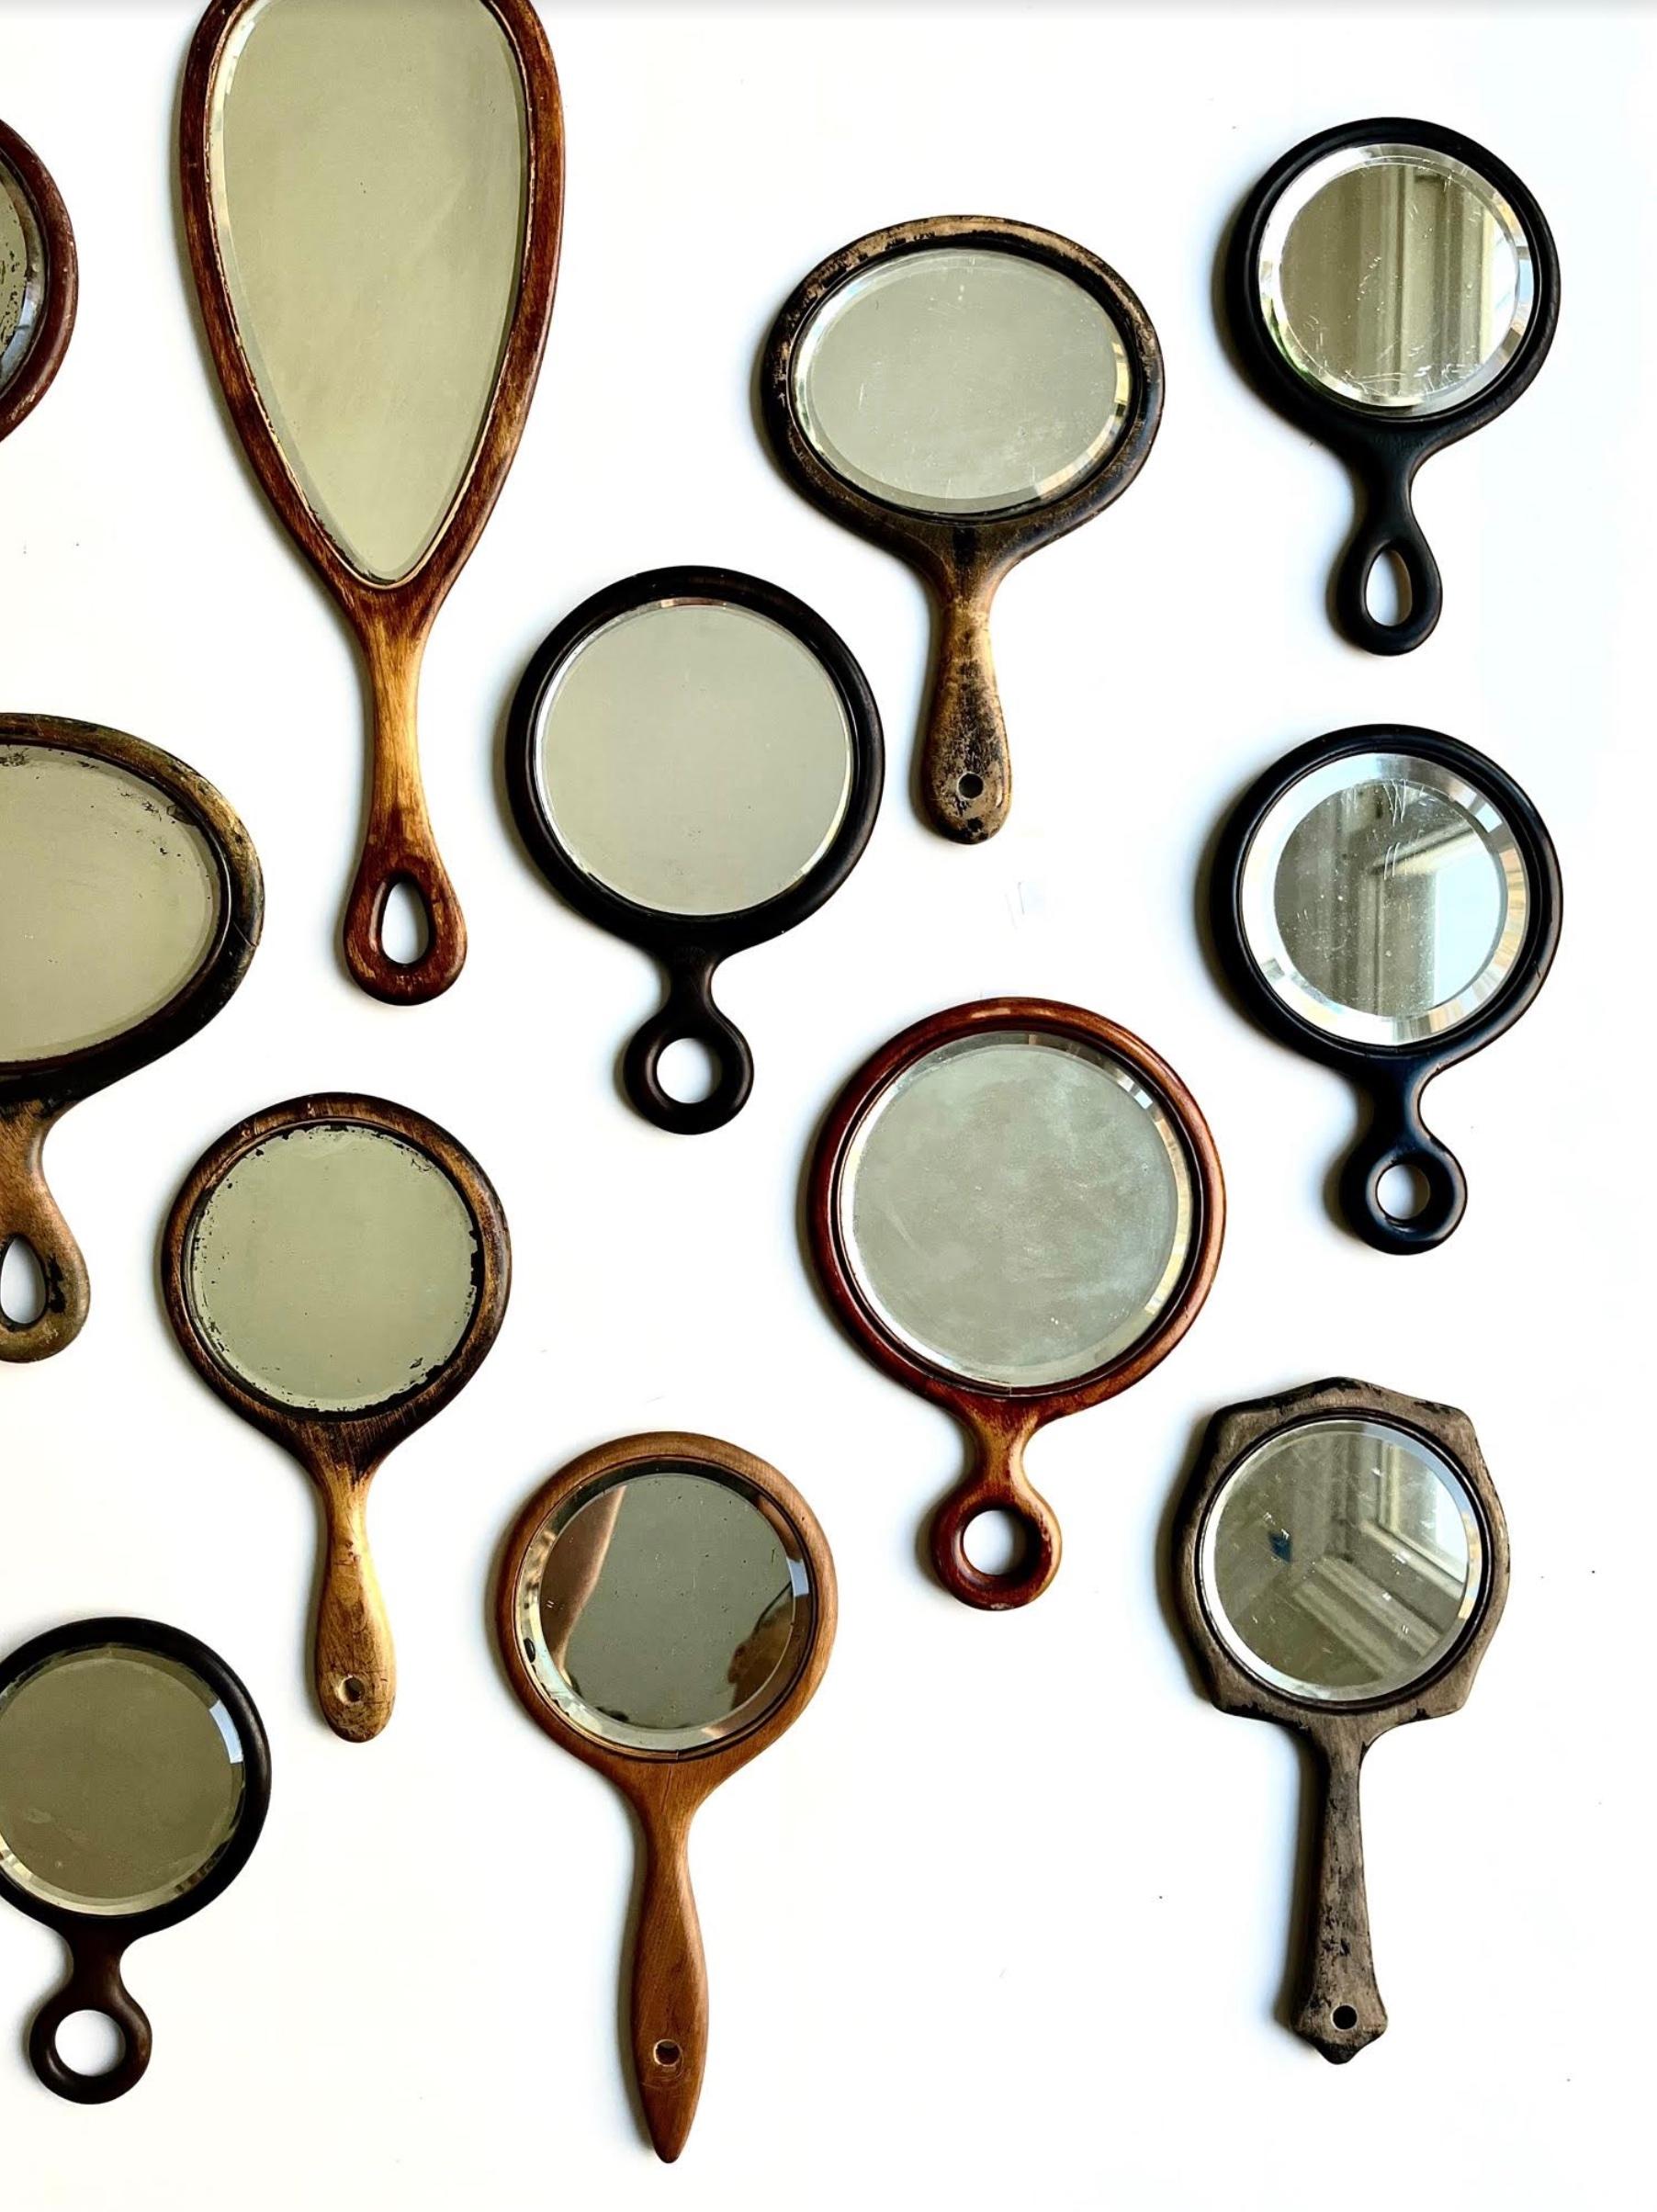 A collection of 16 antique and vintage classic America wooden hand mirrors of various shapes and sizes with beveled glass. The mirrors range in height from 7